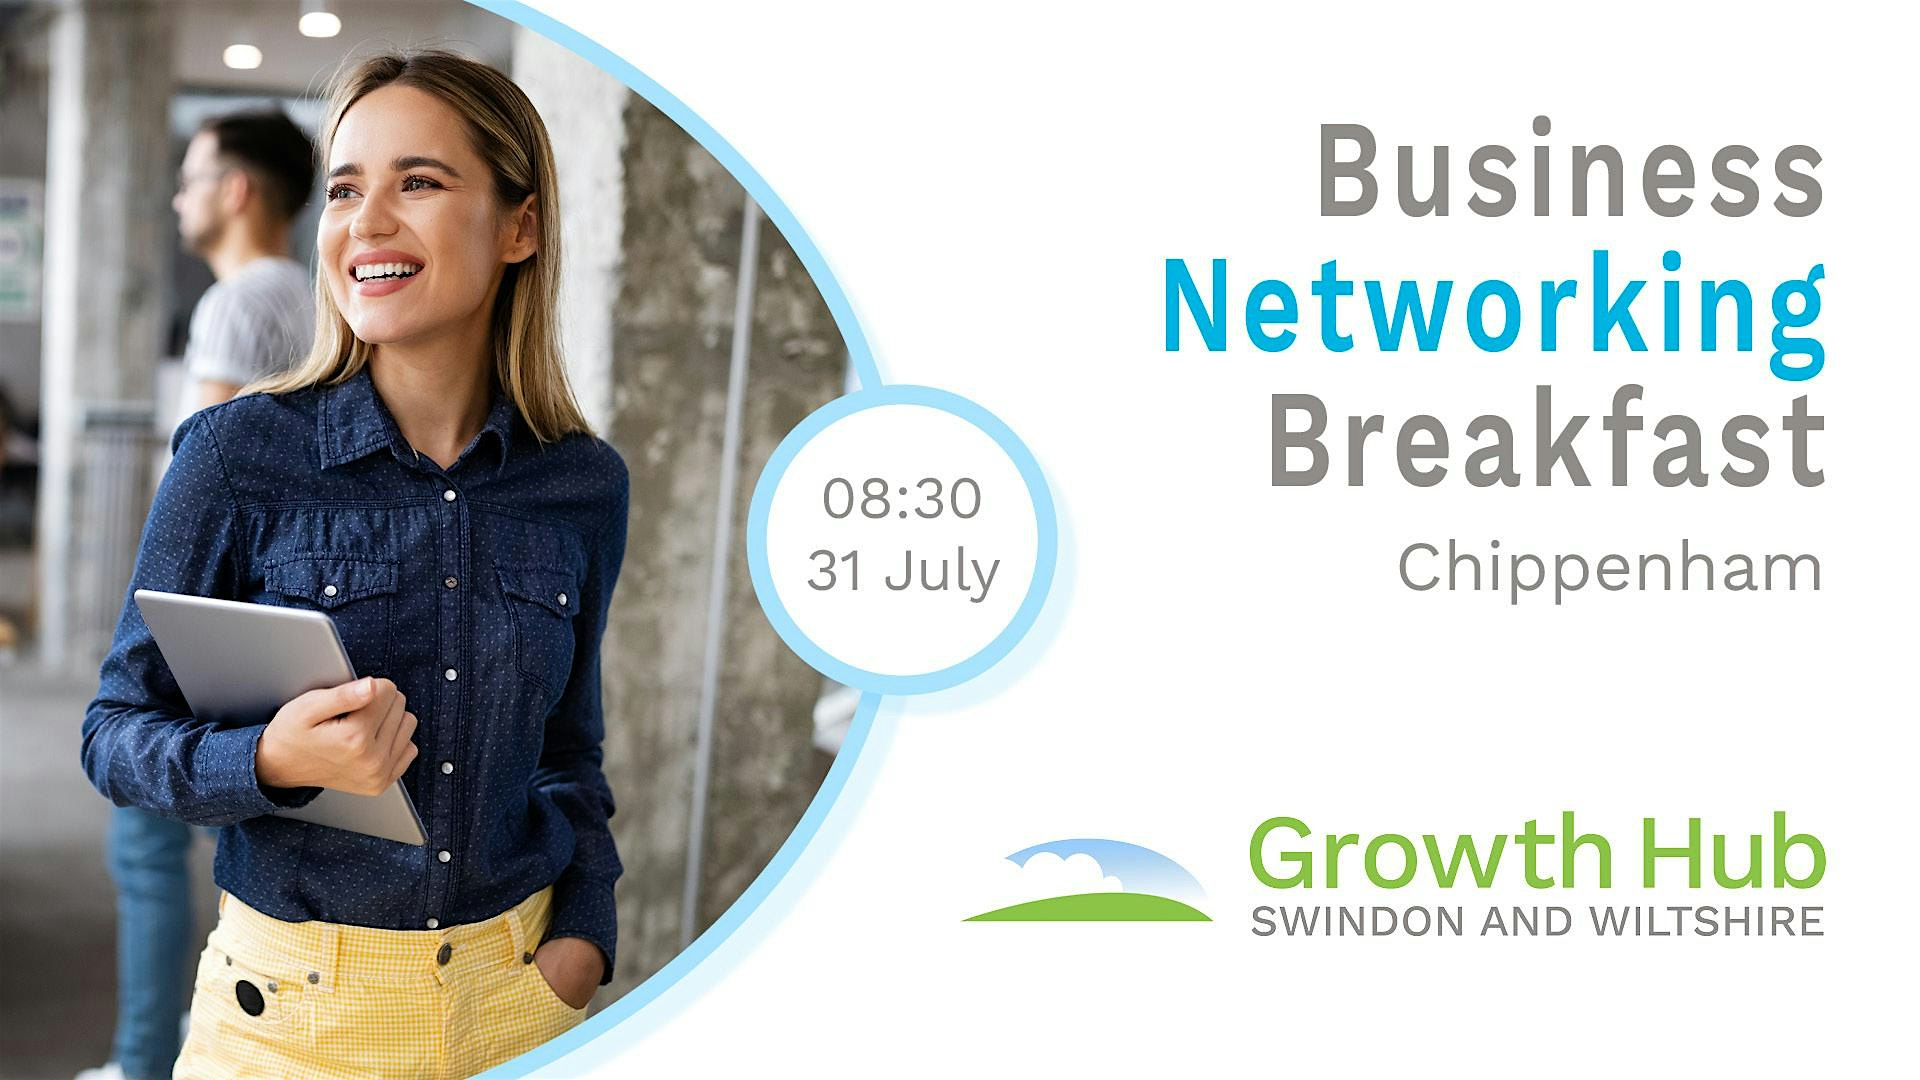 Swindon and Wiltshire Growth Hub  Business Networking Breakfast